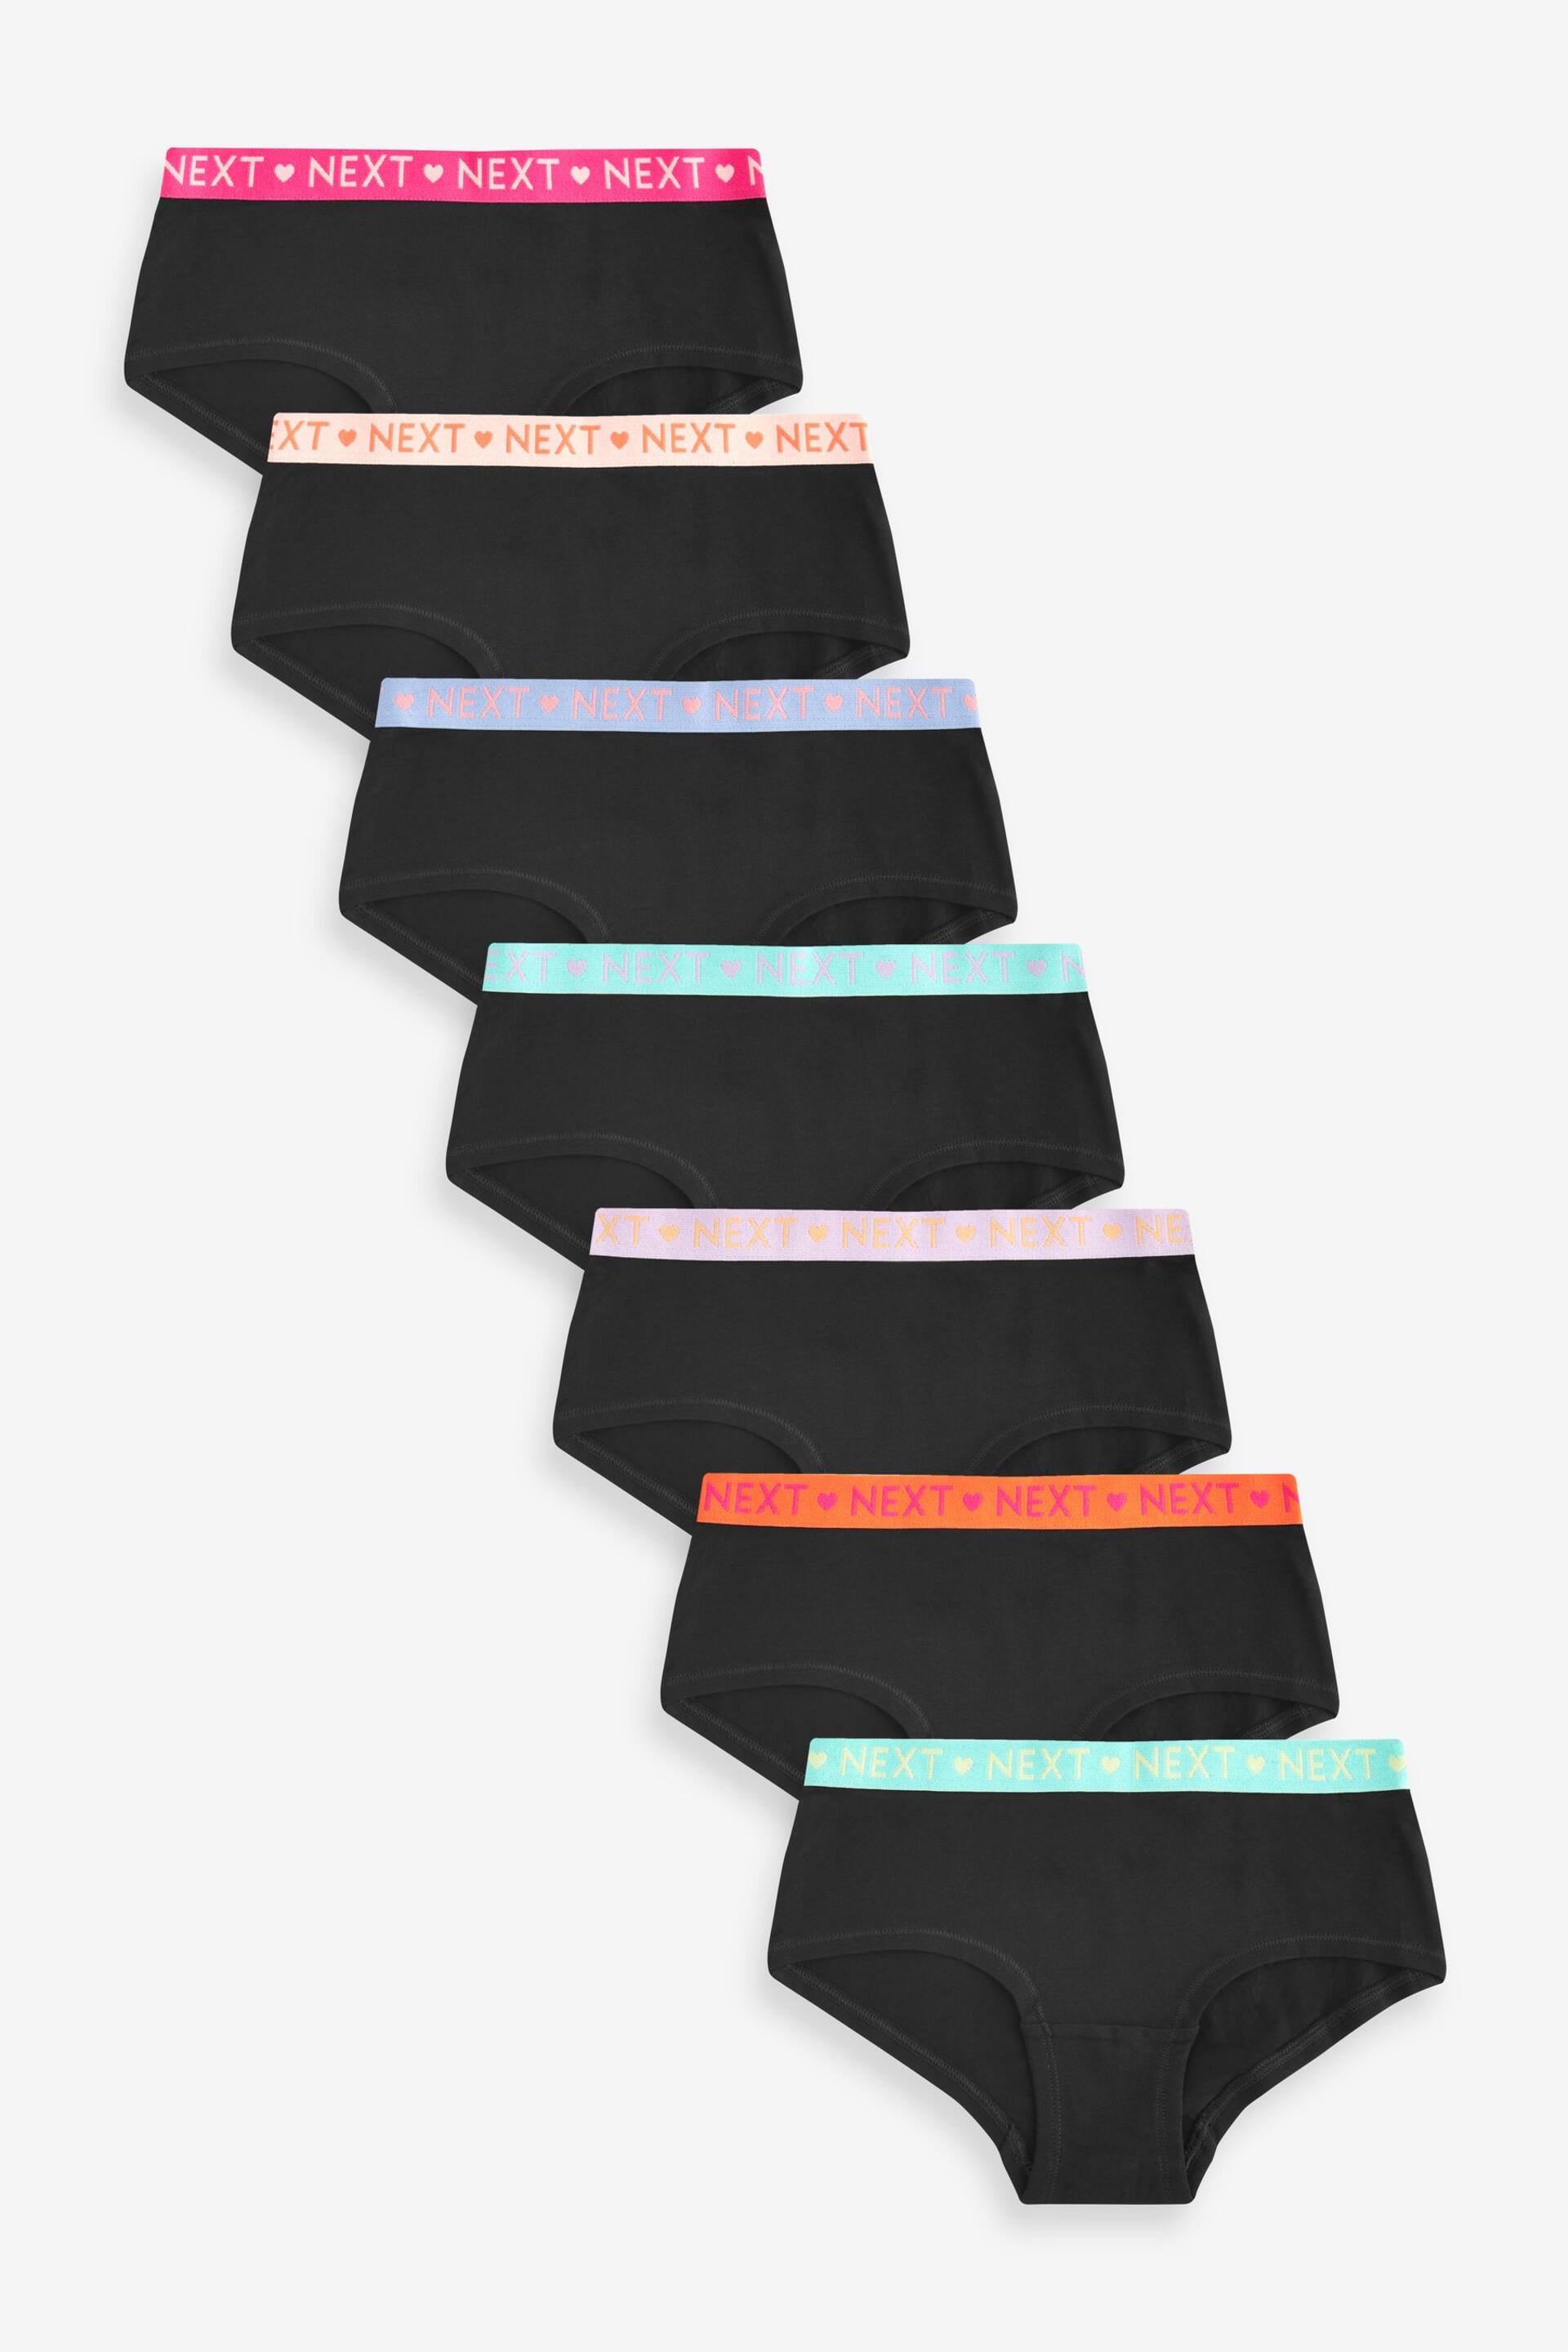 Black Bright Elastic Hipsters 7 Pack (2-16yrs) - Image 1 of 10